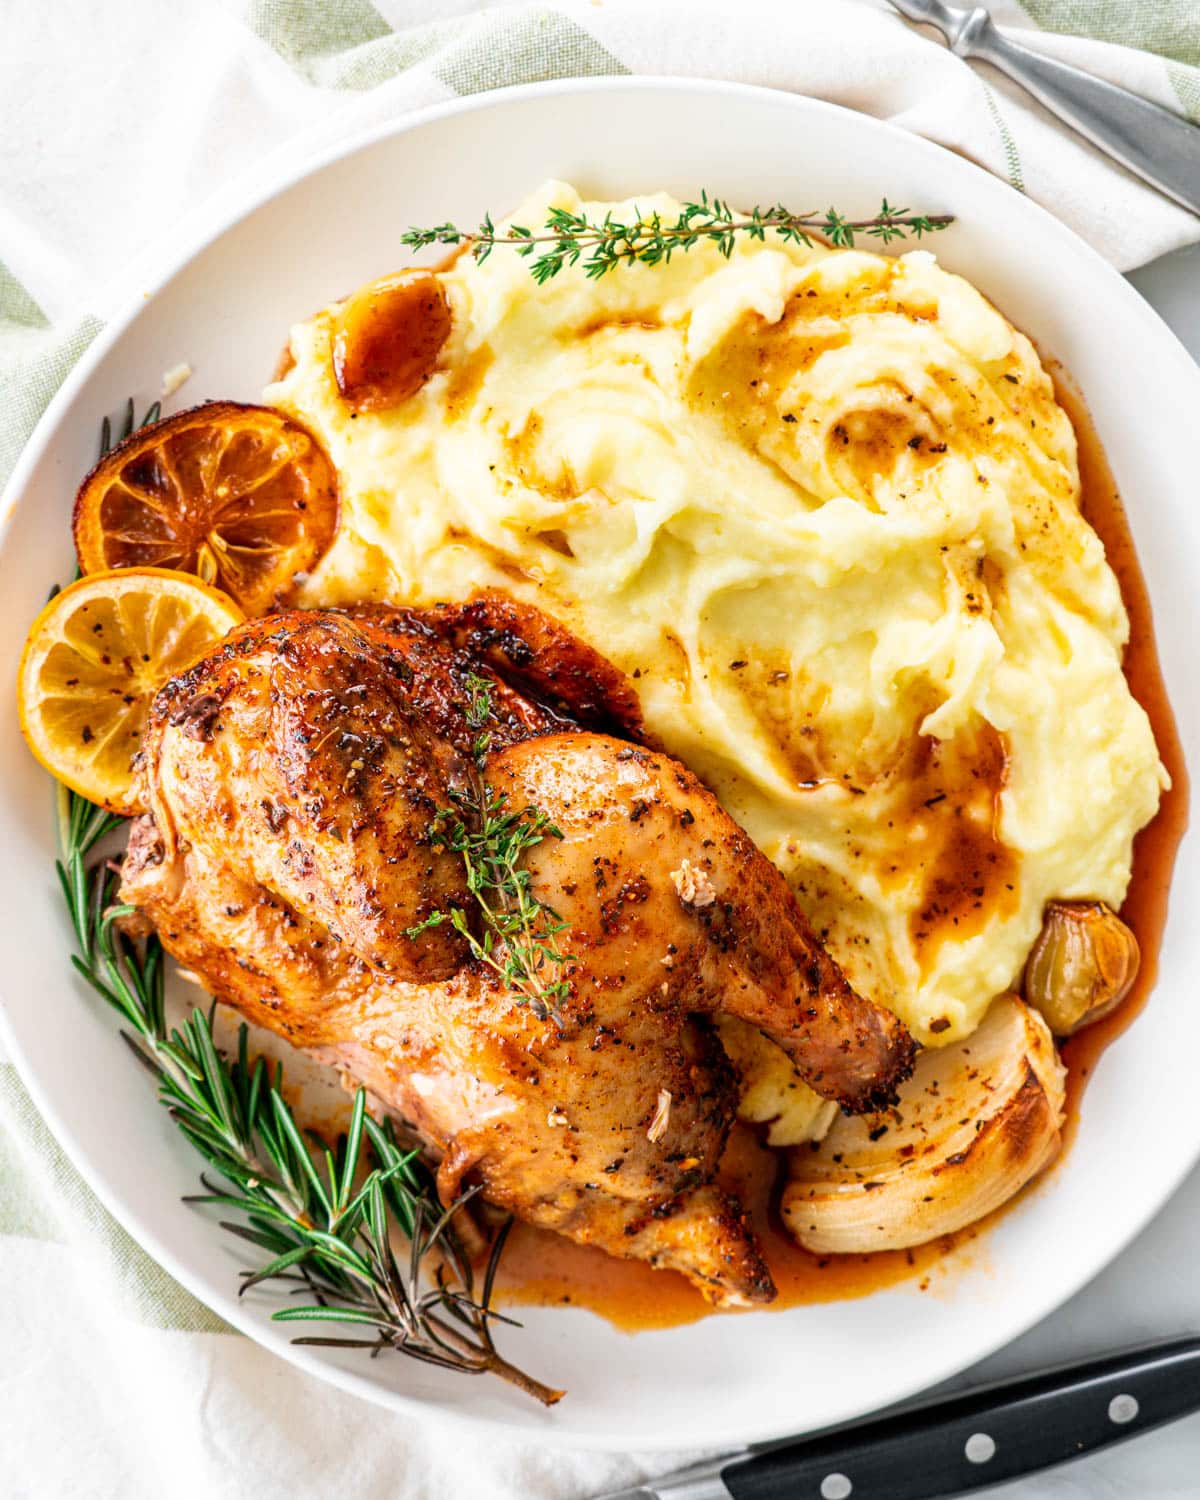 half a cornish hen with mashed potatoes, pan juice and garnished with rosemary and lemon slices